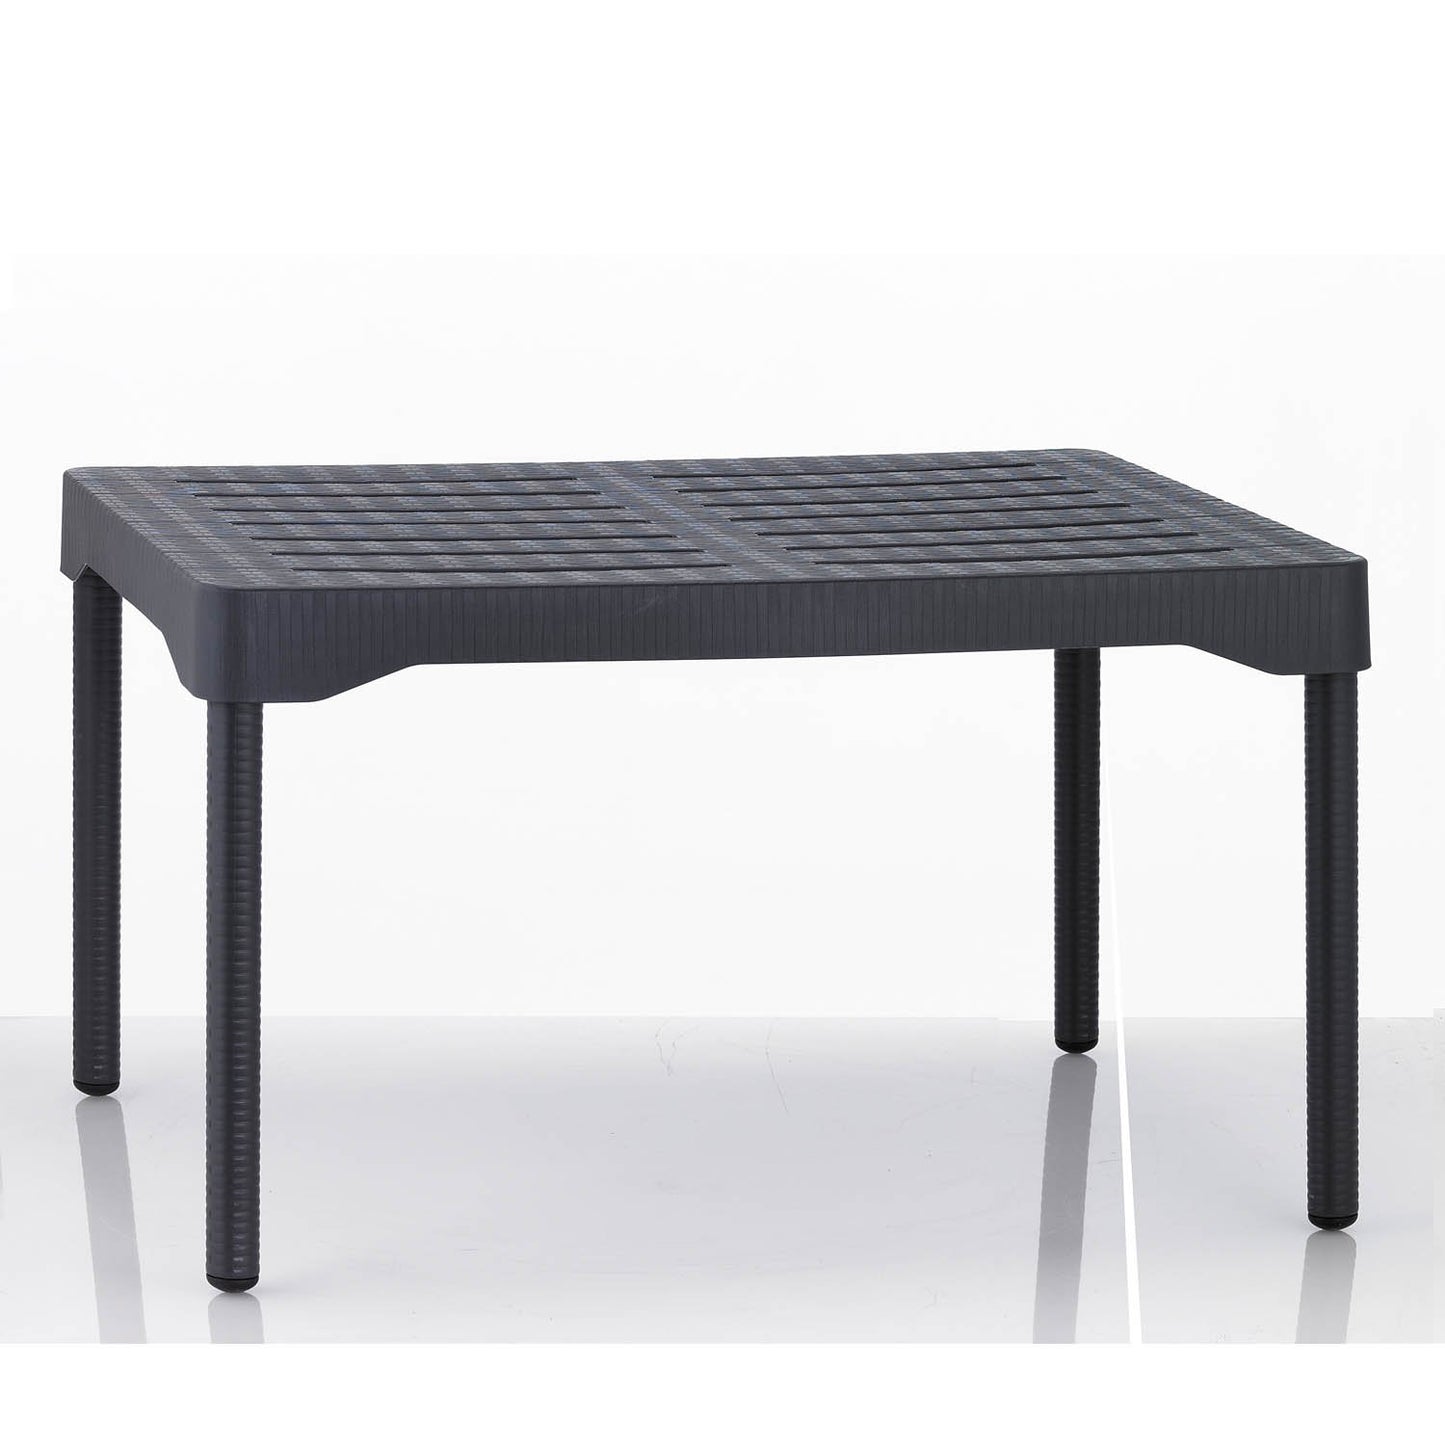 Olly technopoly garden side table by Scab Design - myitalianliving